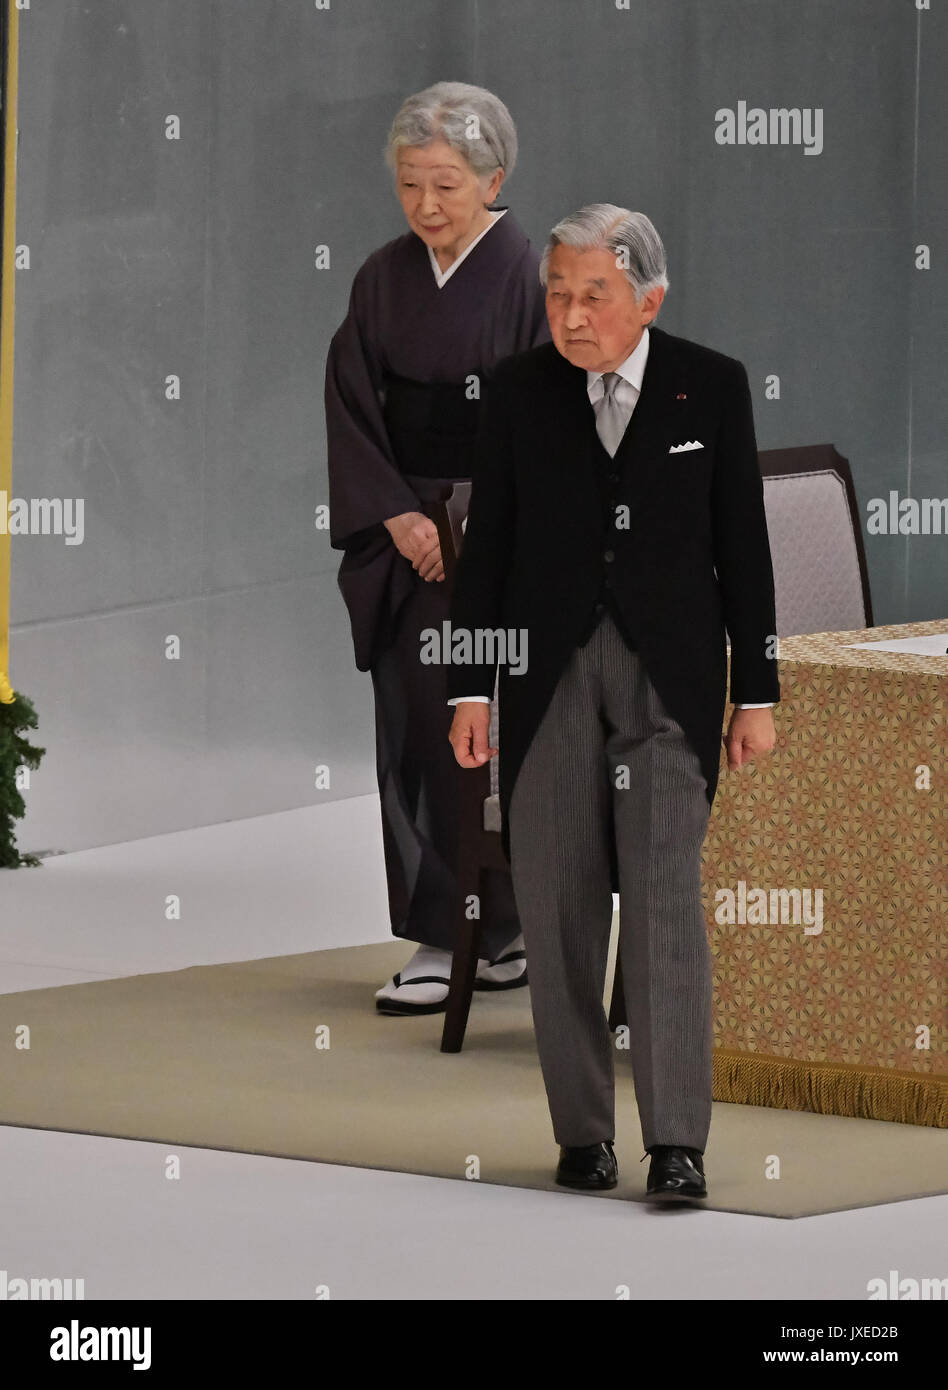 Japan's Emperor Akihito and Empress Michiko attend the memorial service for the war dead of World War II on the 72nd anniversary of the end of the War at Nippon Budokan in Tokyo, Japan on August 15, 2017. Credit: AFLO/Alamy Live News Stock Photo